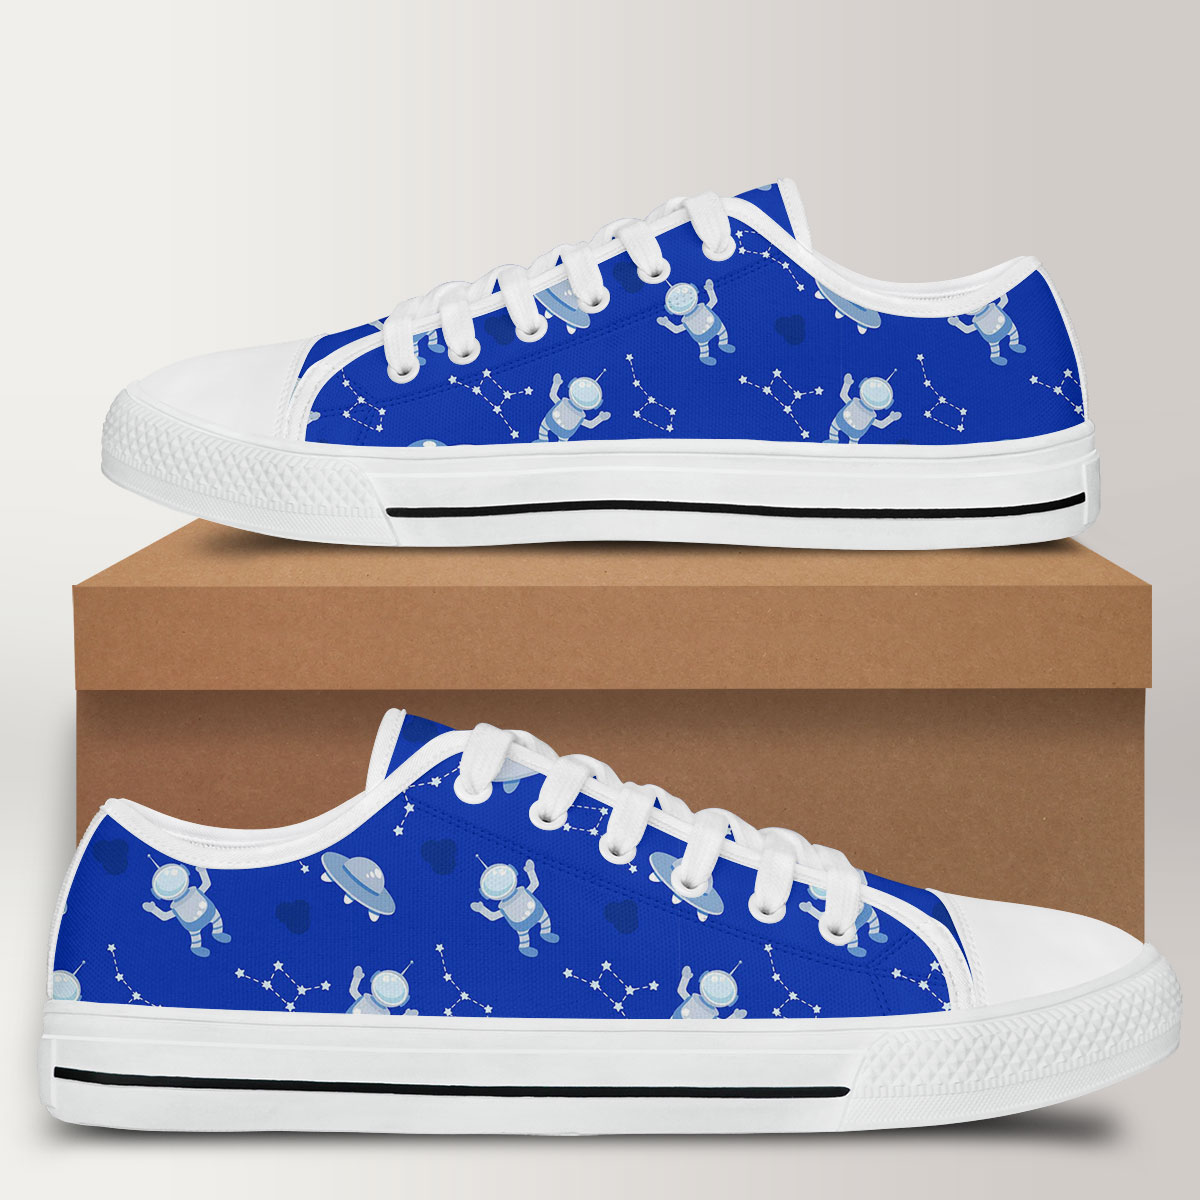 Astronauts Spaceships And Constellation Low Top Shoes